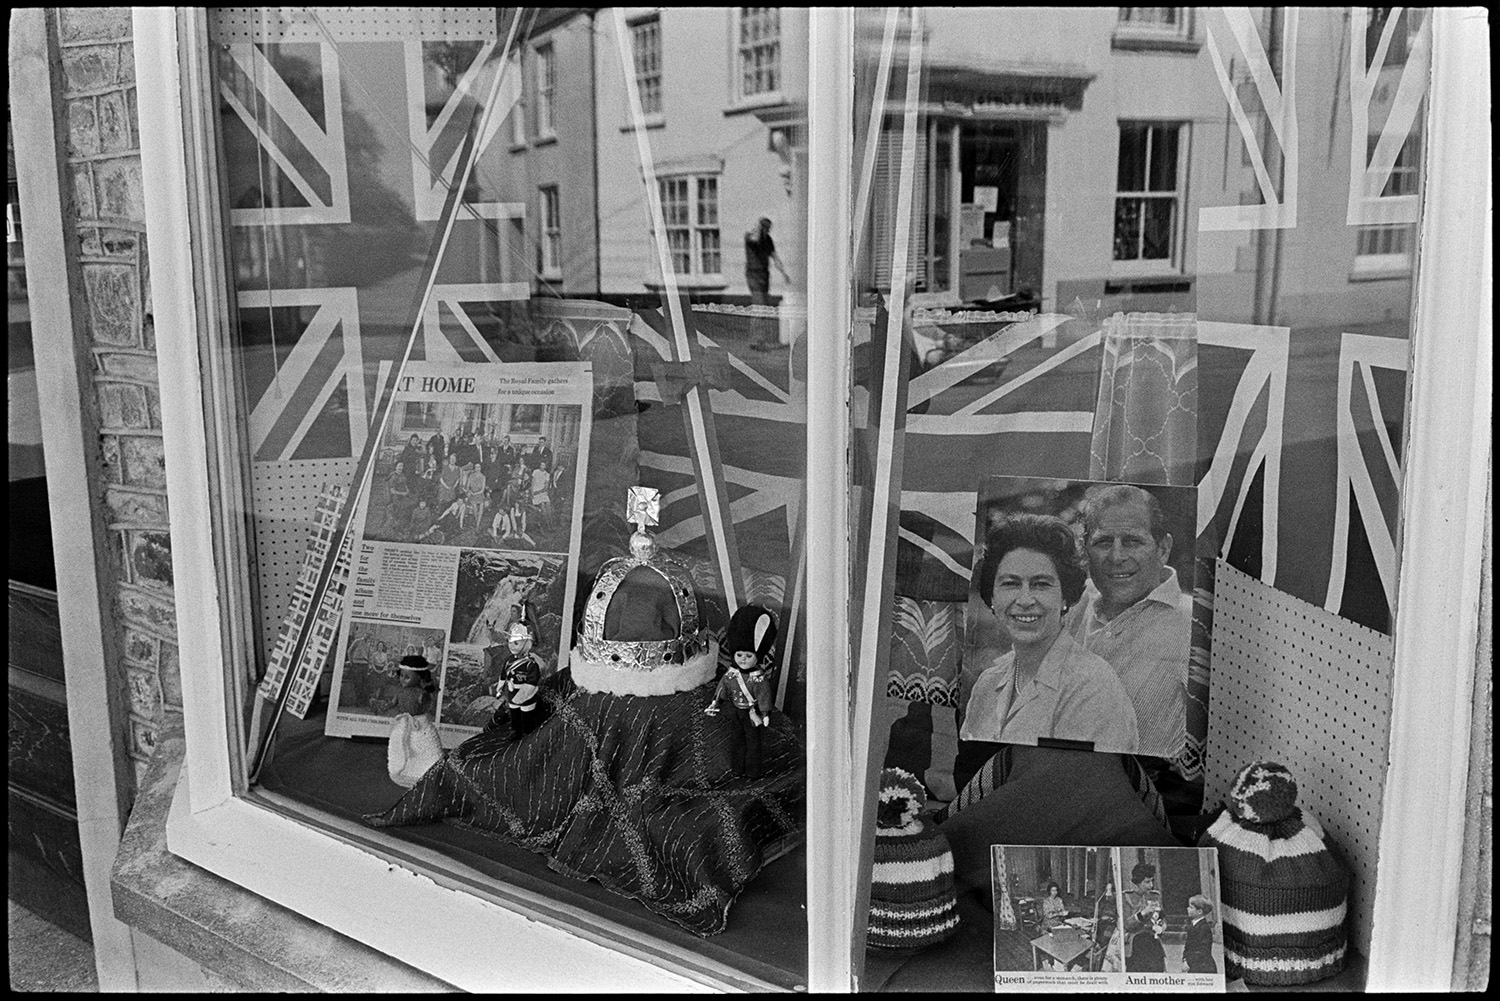 Grocery store decorated for jubilee. 
[The shop front window of Knights Grocery Store in Fore Street, Chulmleigh, decorated for Queen Elizabeth II Silver Jubilee. It contains Union Jack flags, a model crown and pictures of the Queen.]